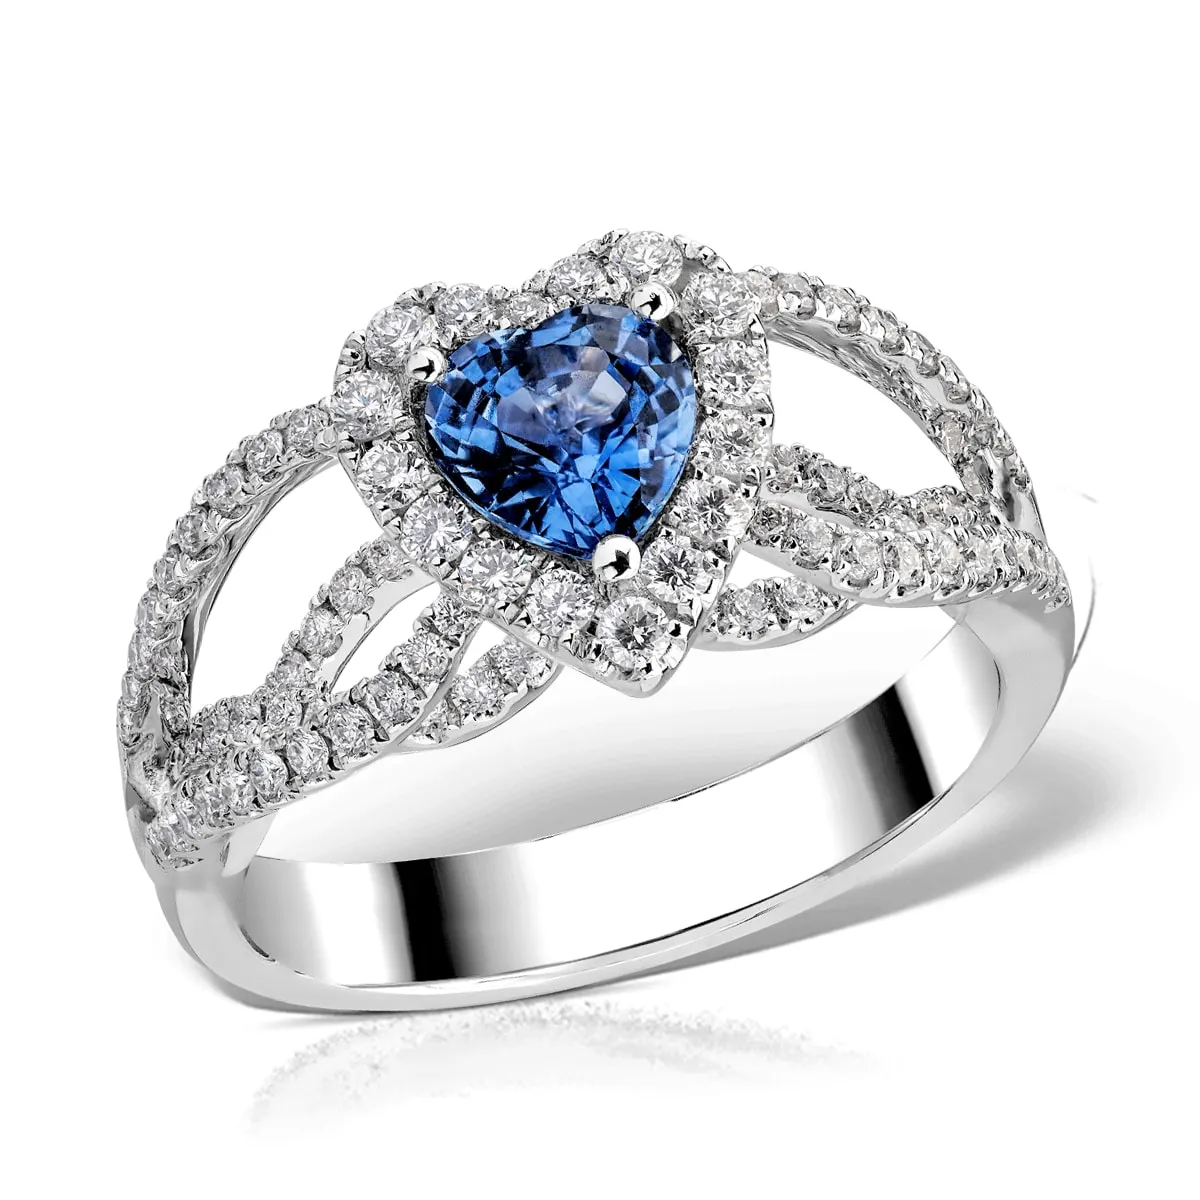 18K white gold engagement ring with 1.18ct sapphire and 0.71ct diamonds